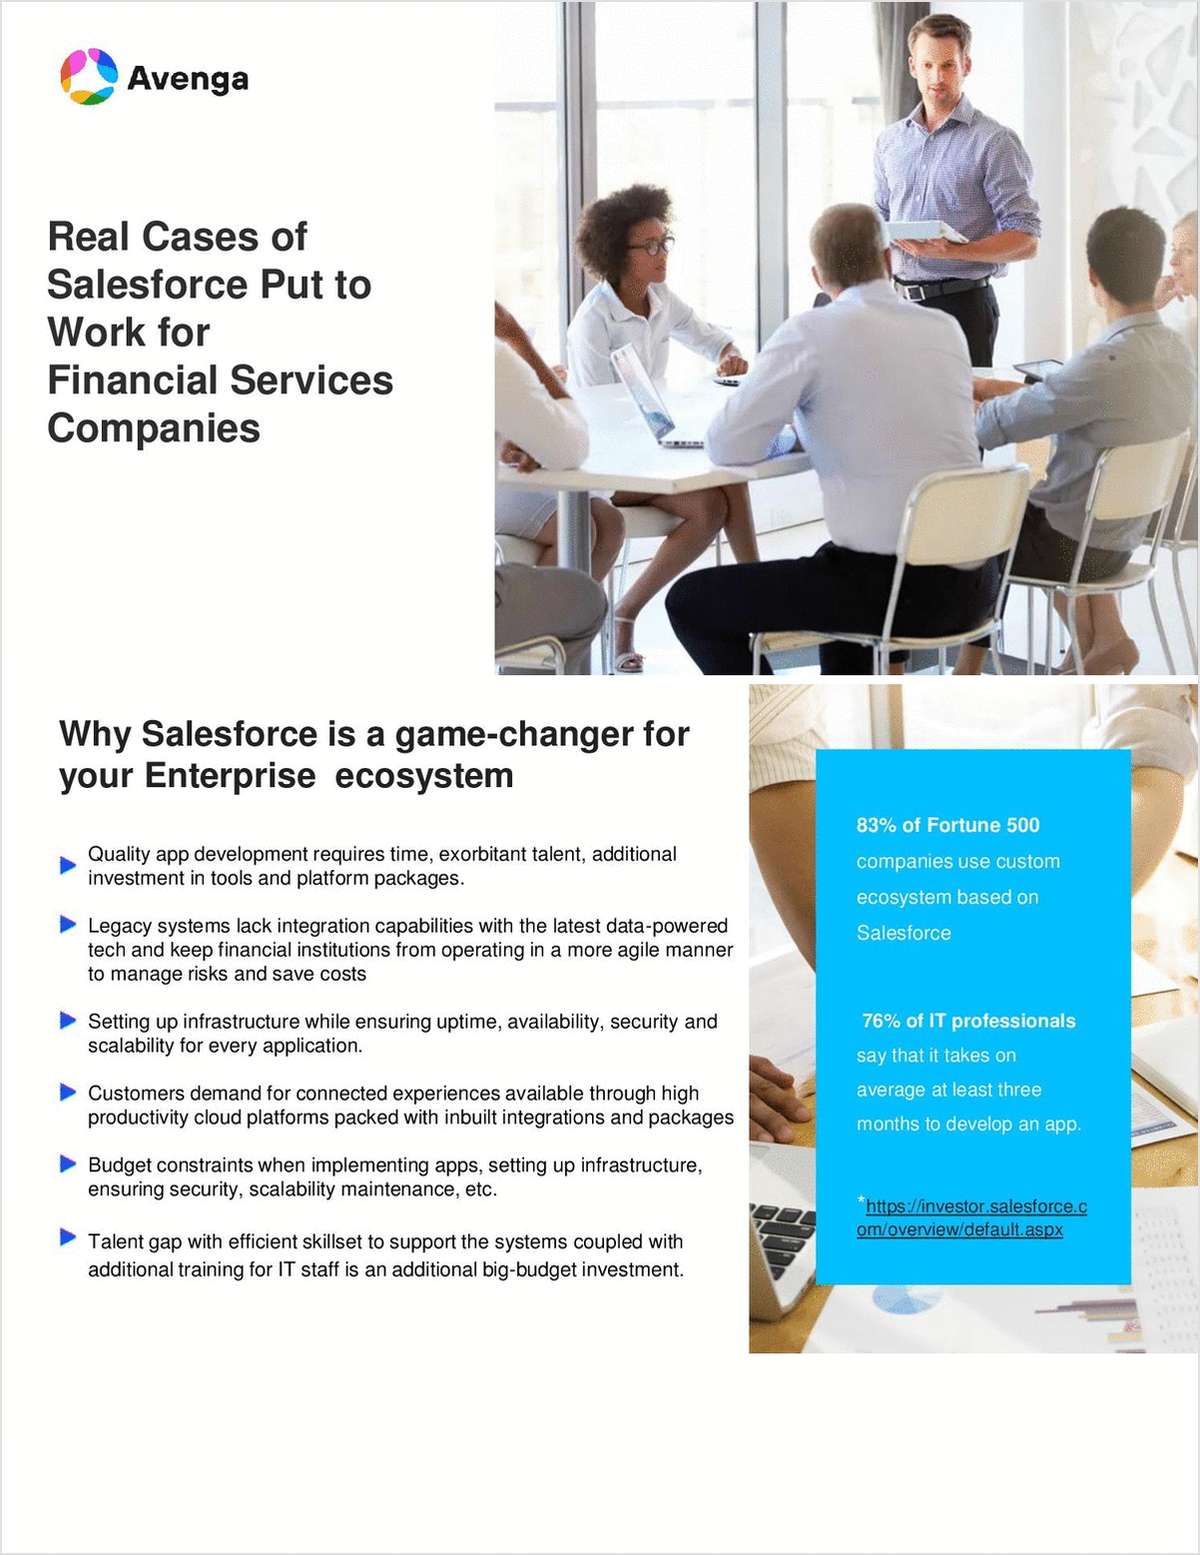 Real Cases of Salesforce Platform Put to Work for Financial Services Companies